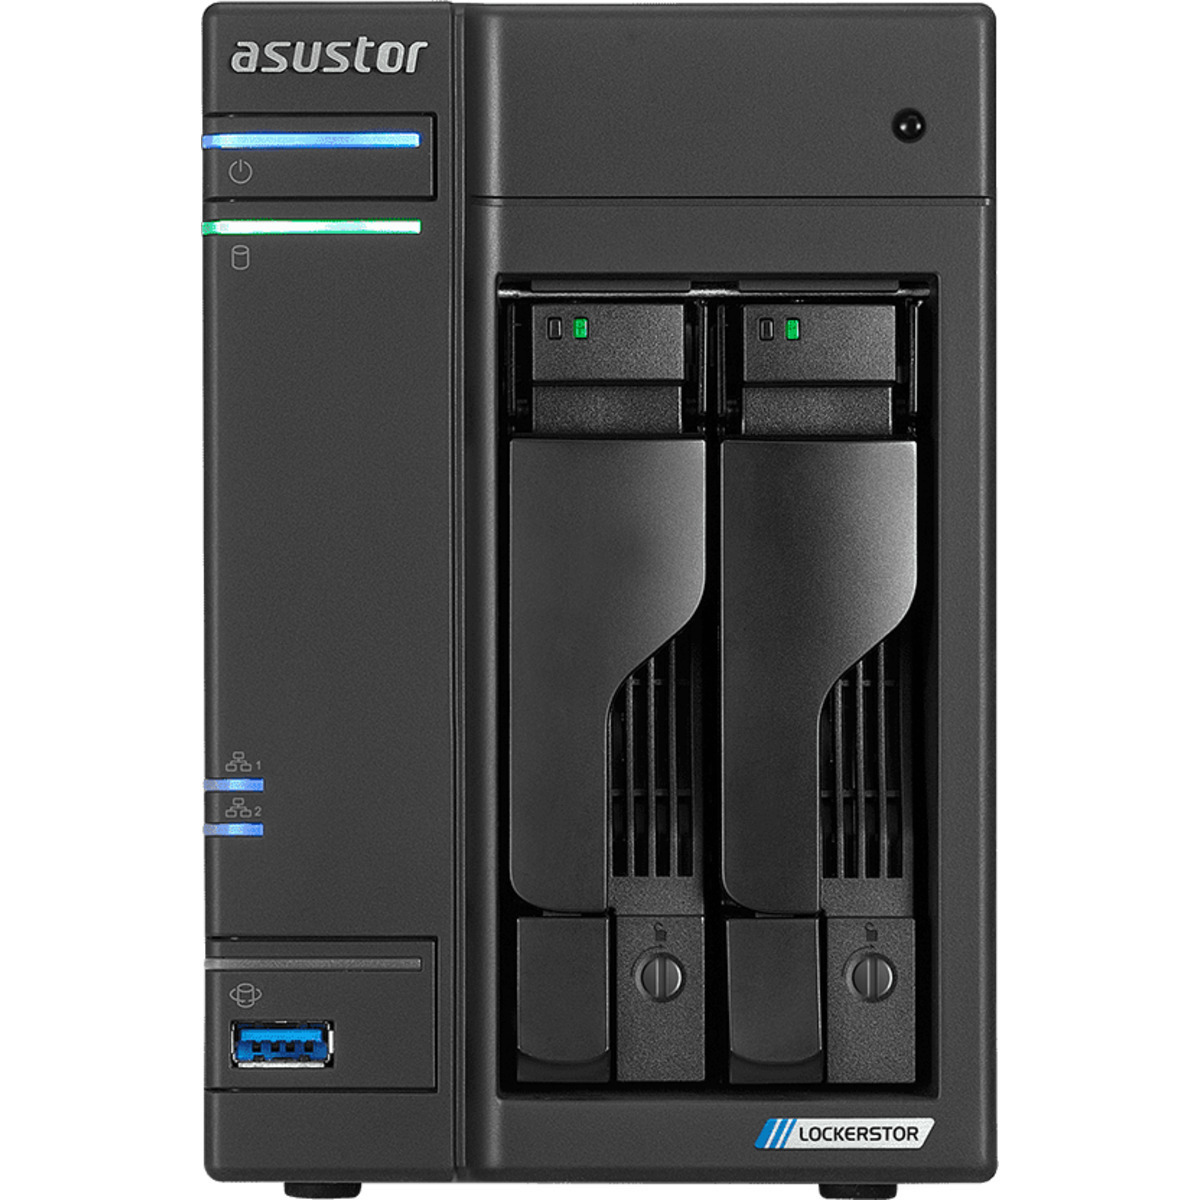 buy $1254 ASUSTOR AS6602T Lockerstor 2 4tb Desktop NAS - Network Attached Storage Device 2x2000gb Western Digital Red SA500 WDS200T1R0A 2.5 SATA 6Gb/s SSD NAS Class Drives Installed - Burn-In Tested - FREE RAM UPGRADE - nas headquarters buy network attached storage server device das new raid-5 free shipping usa christmas new year holiday sale AS6602T Lockerstor 2